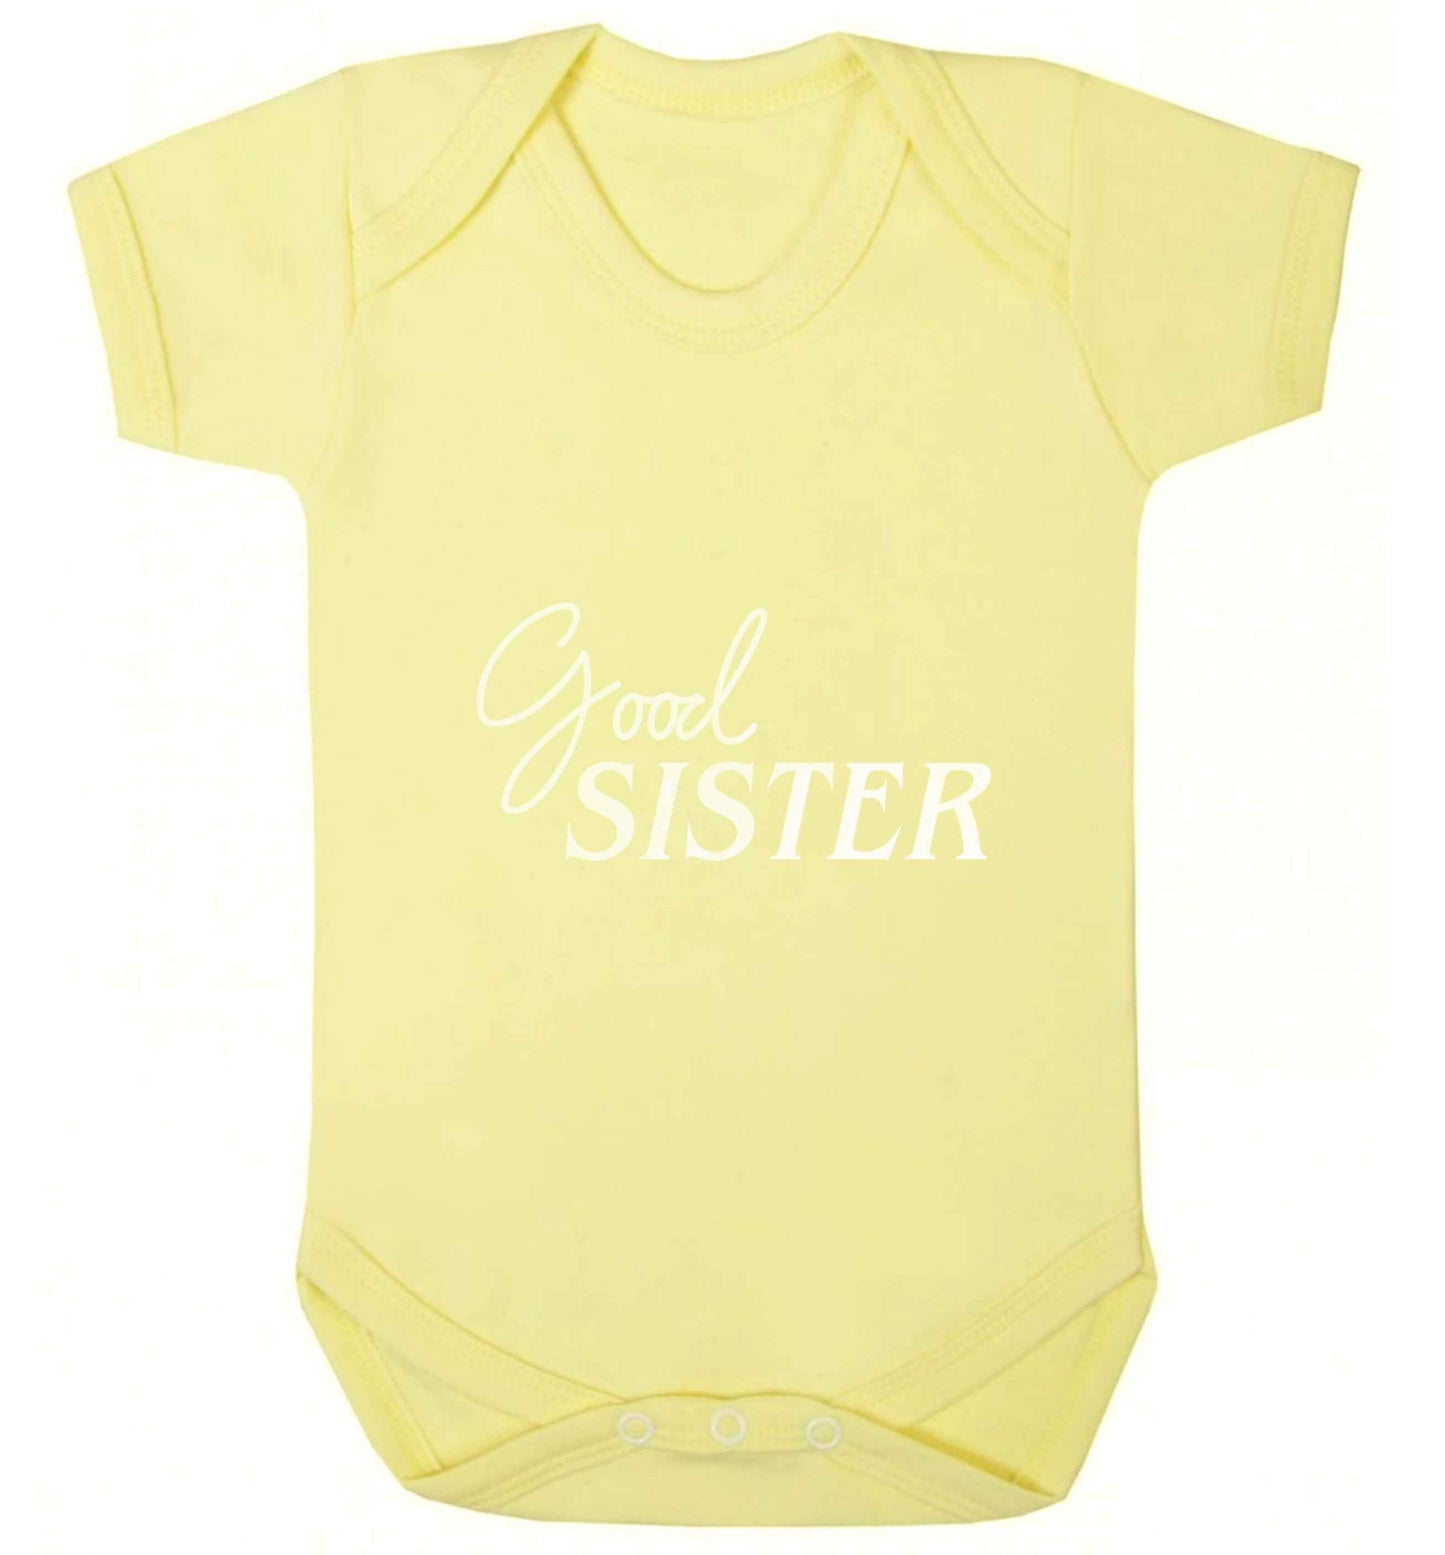 Good sister baby vest pale yellow 18-24 months